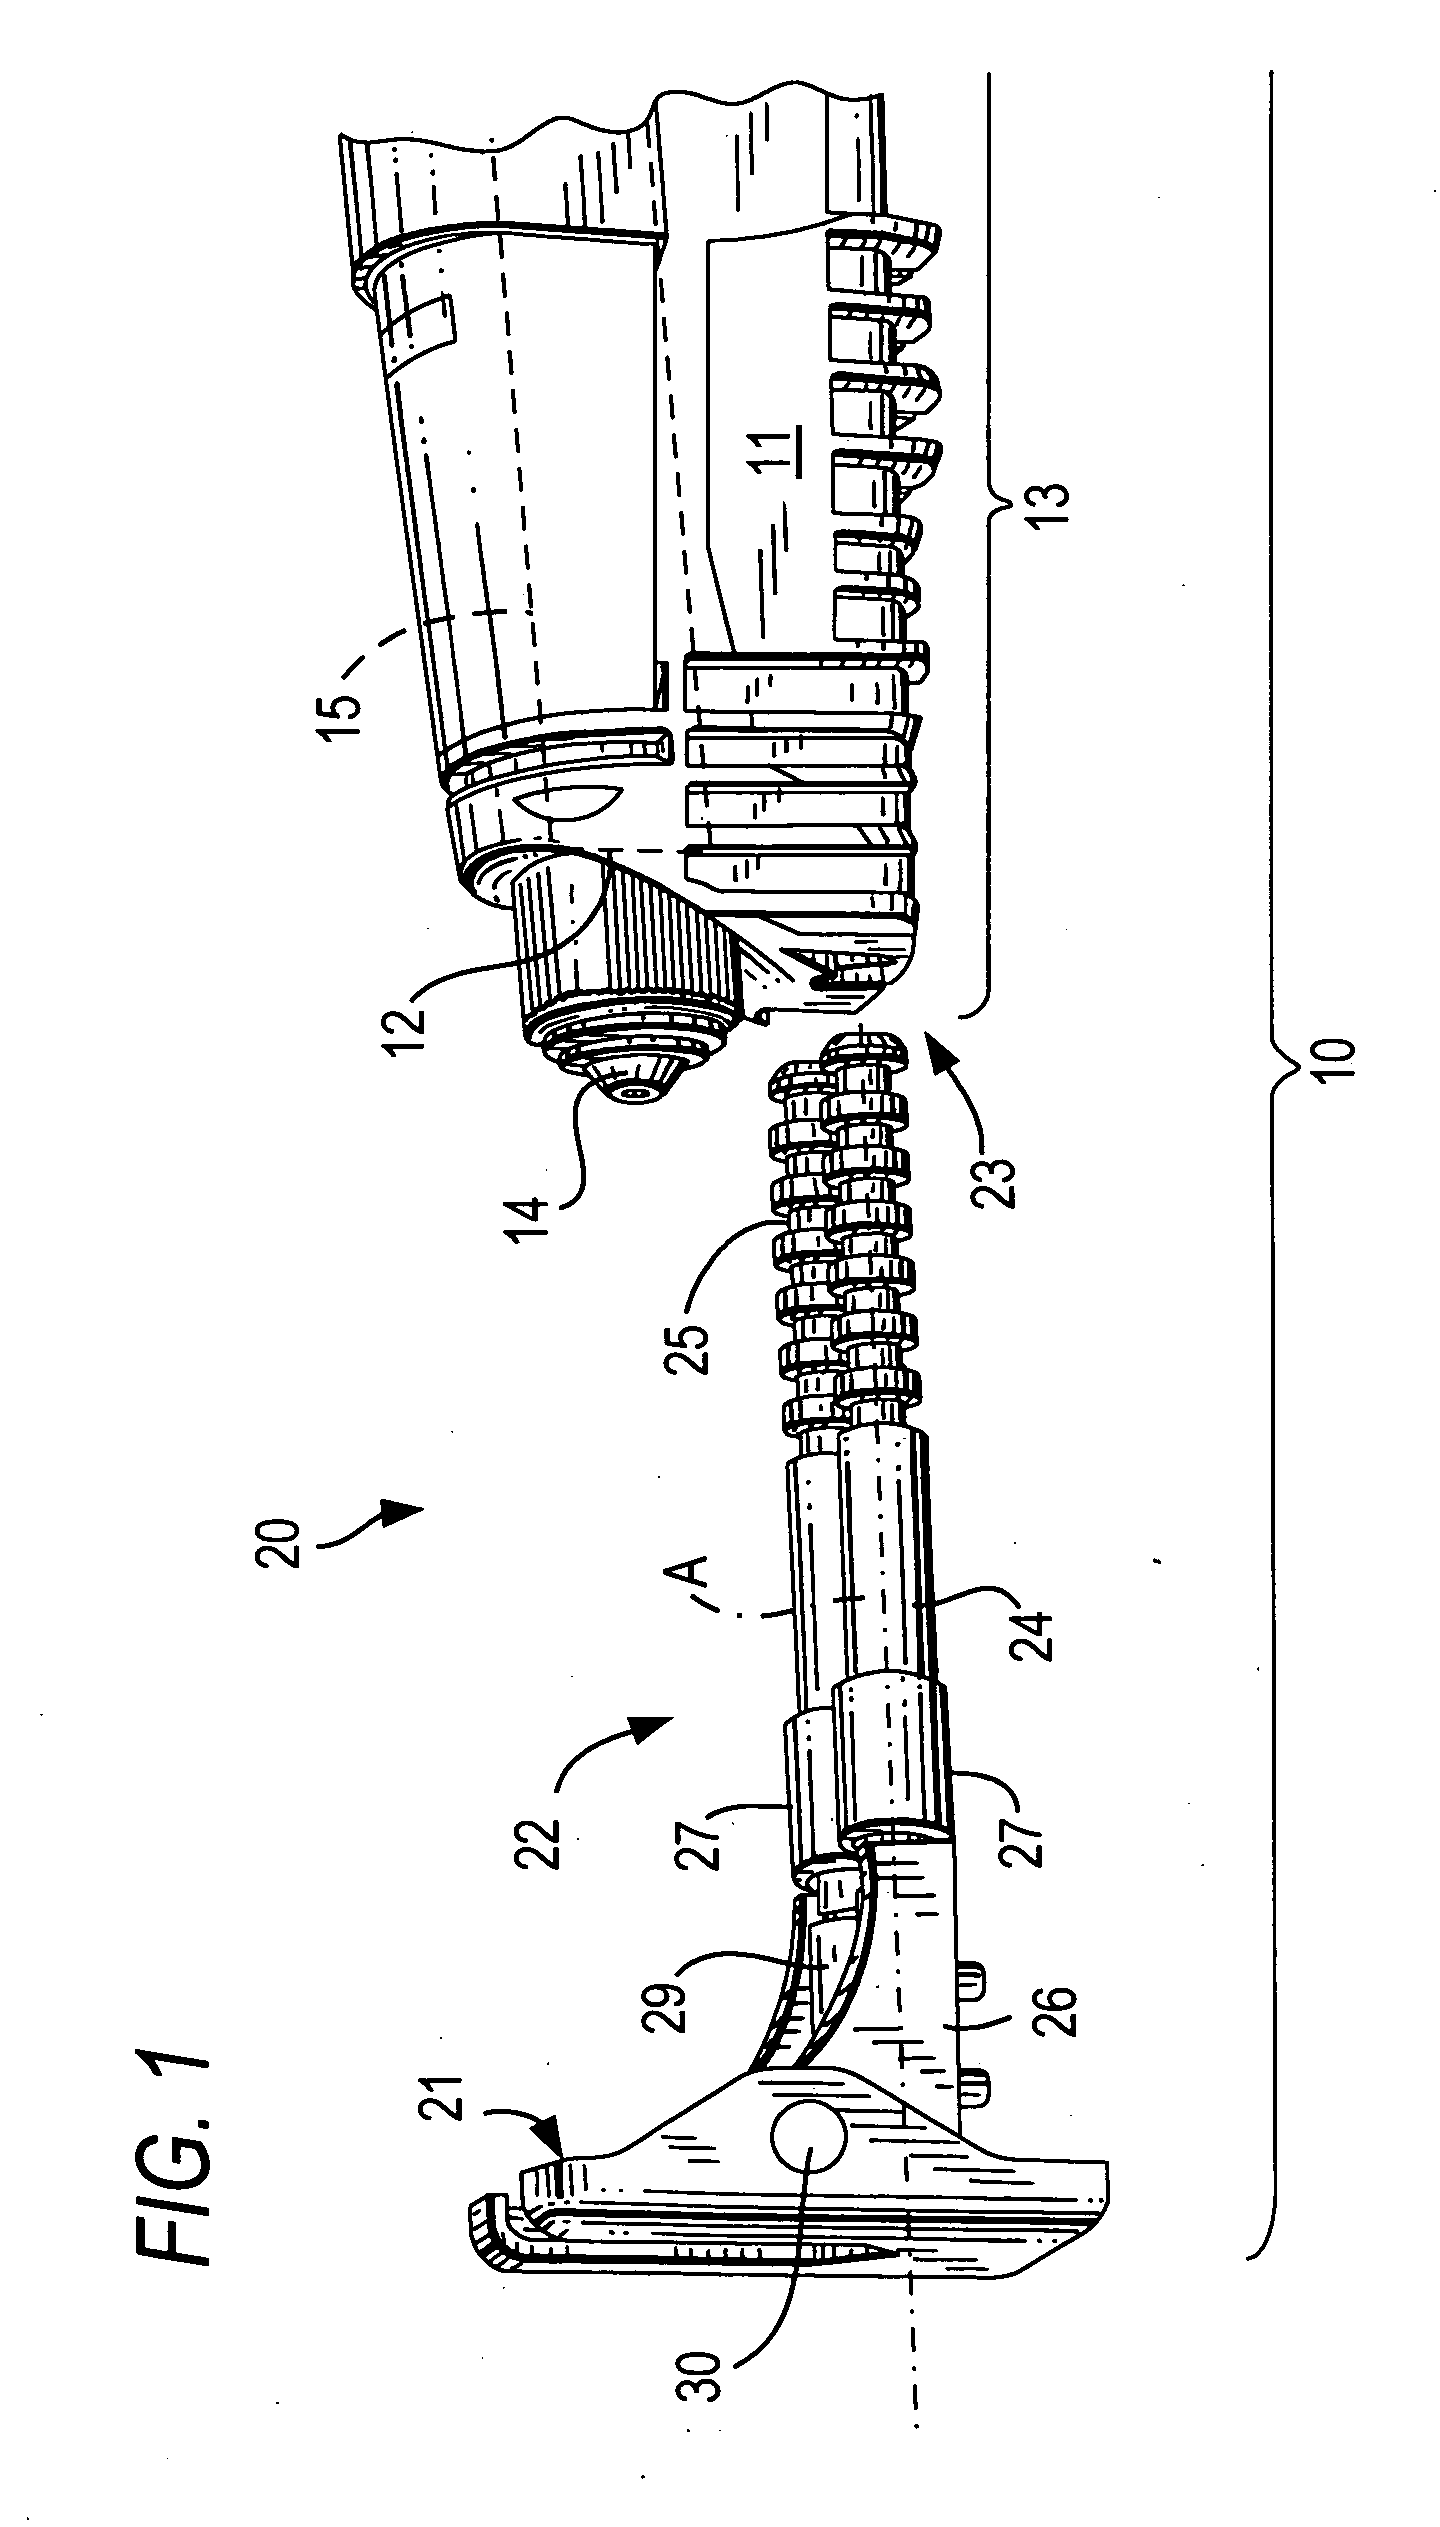 Motor-driven saber saw with guide device